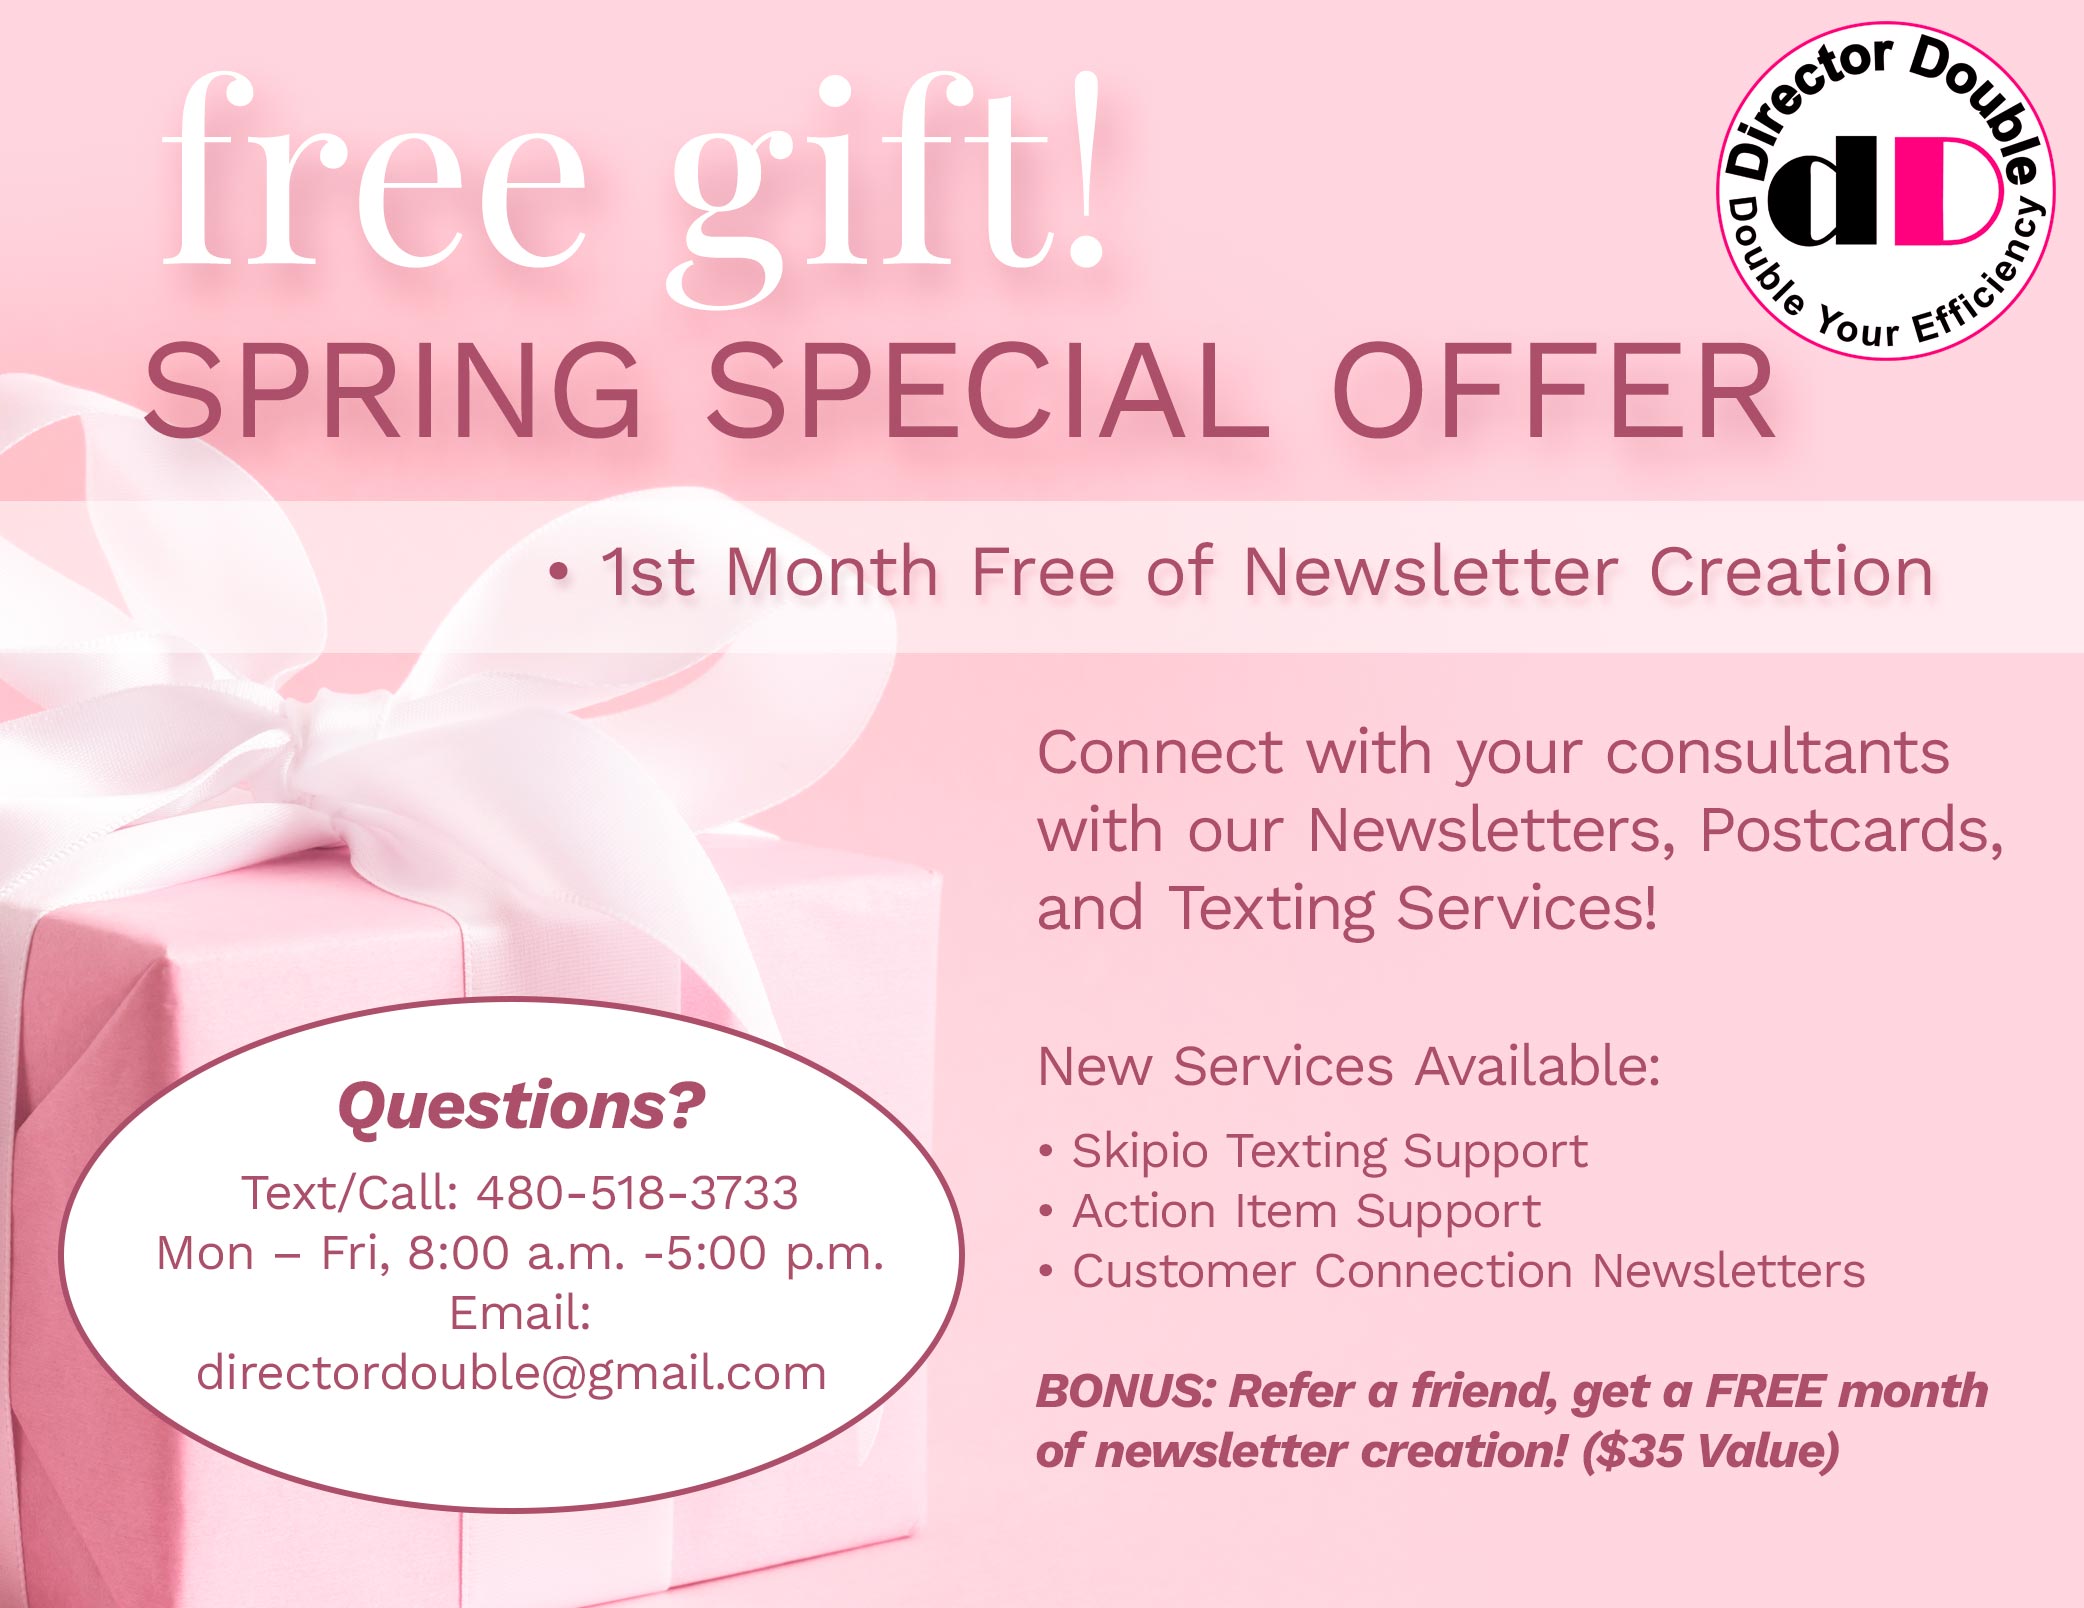 Jen Coffey presents DirectorDouble.com Spring Special Offer - Your Assistant for Newsletters and Postcards for your Mary Kay business